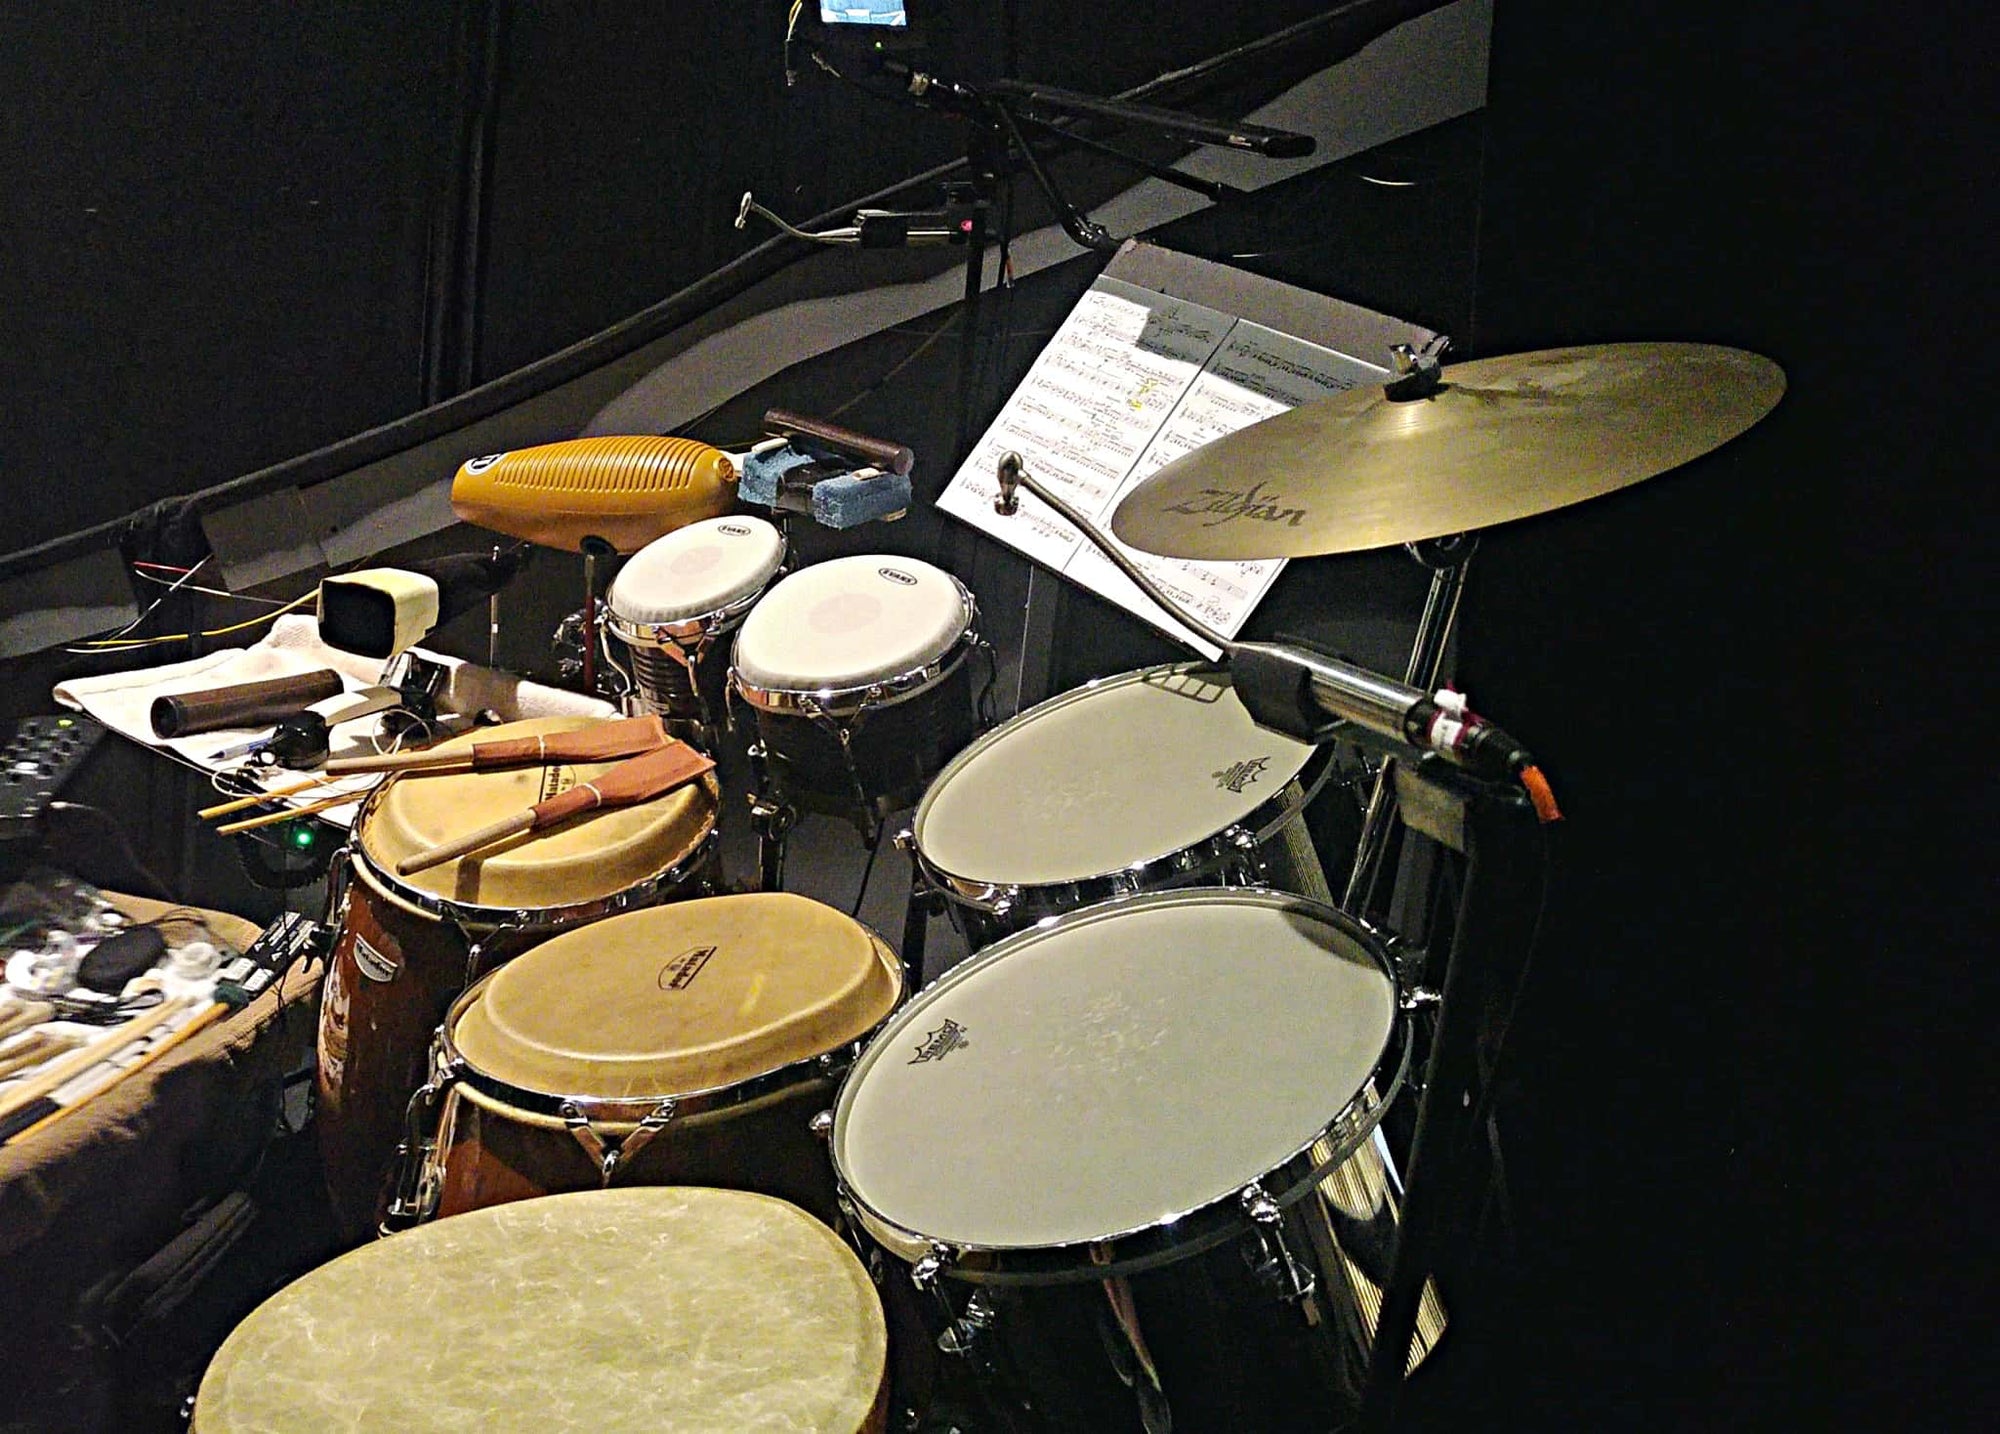 Kory Andry's setup for Guys and Dolls at the Guthrie Theater in Minneapolis, Minnesota.